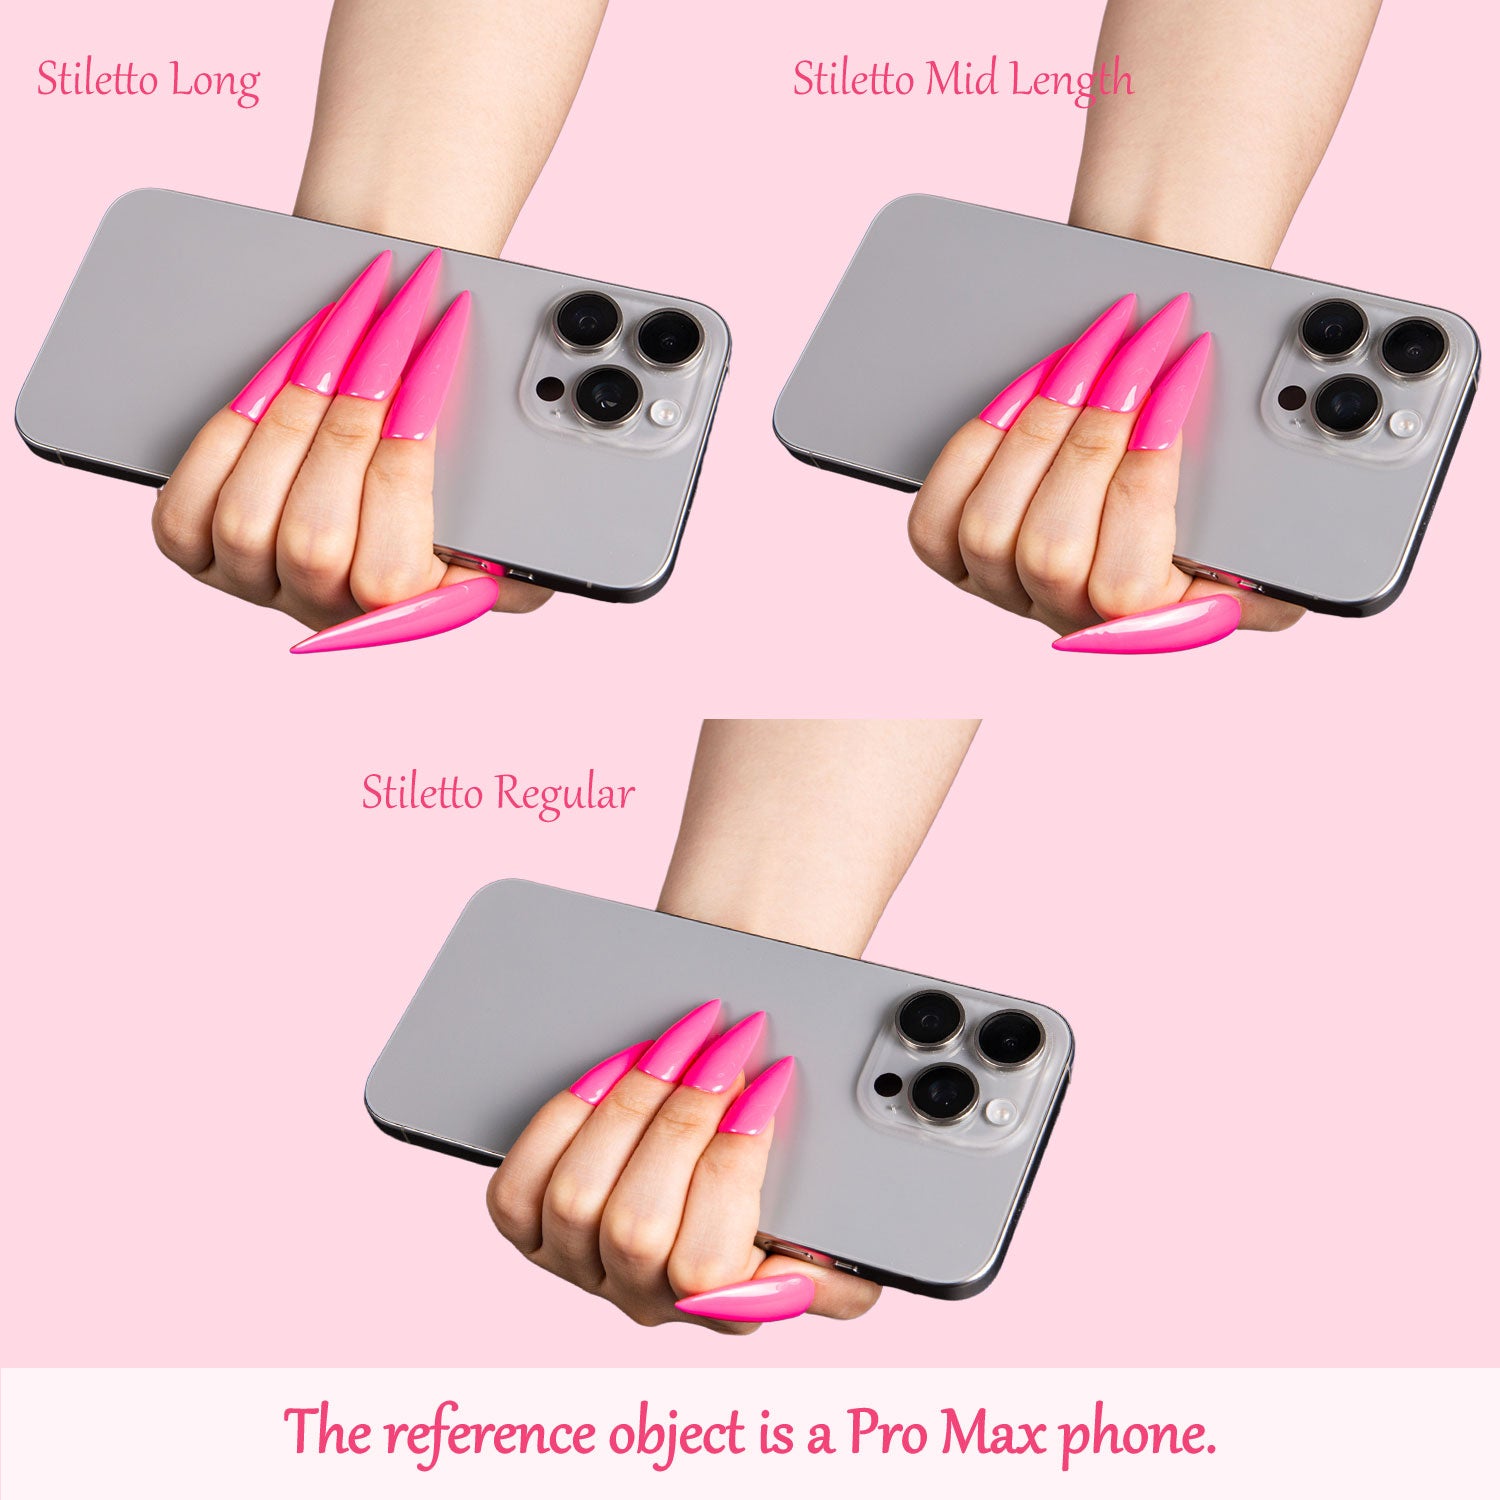 Hand holding Pro Max phone showcasing three lengths of neon pink stiletto press-on nails: Stiletto Long, Stiletto Mid-Length, and Stiletto Regular, against a light pink background.